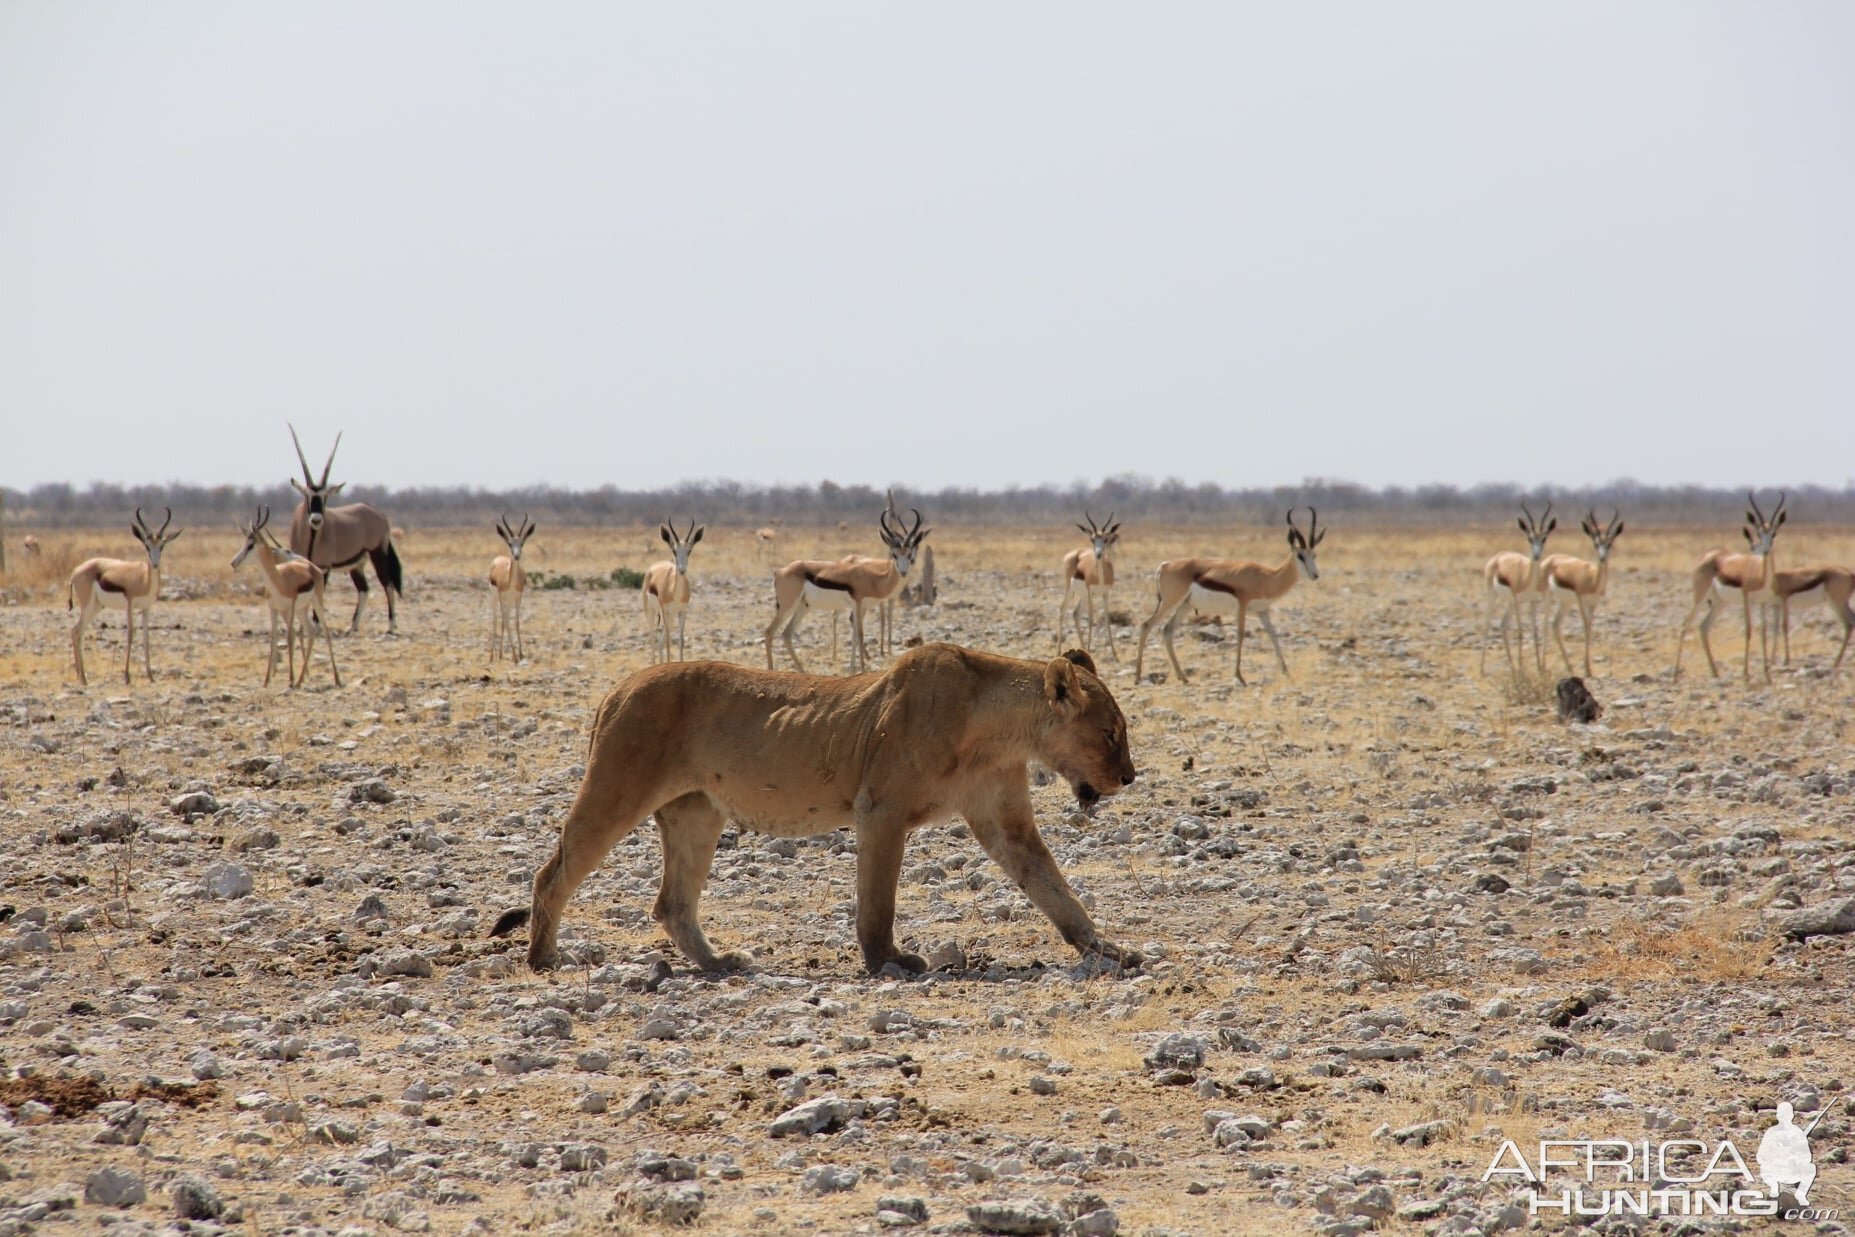 Lioness Namibia